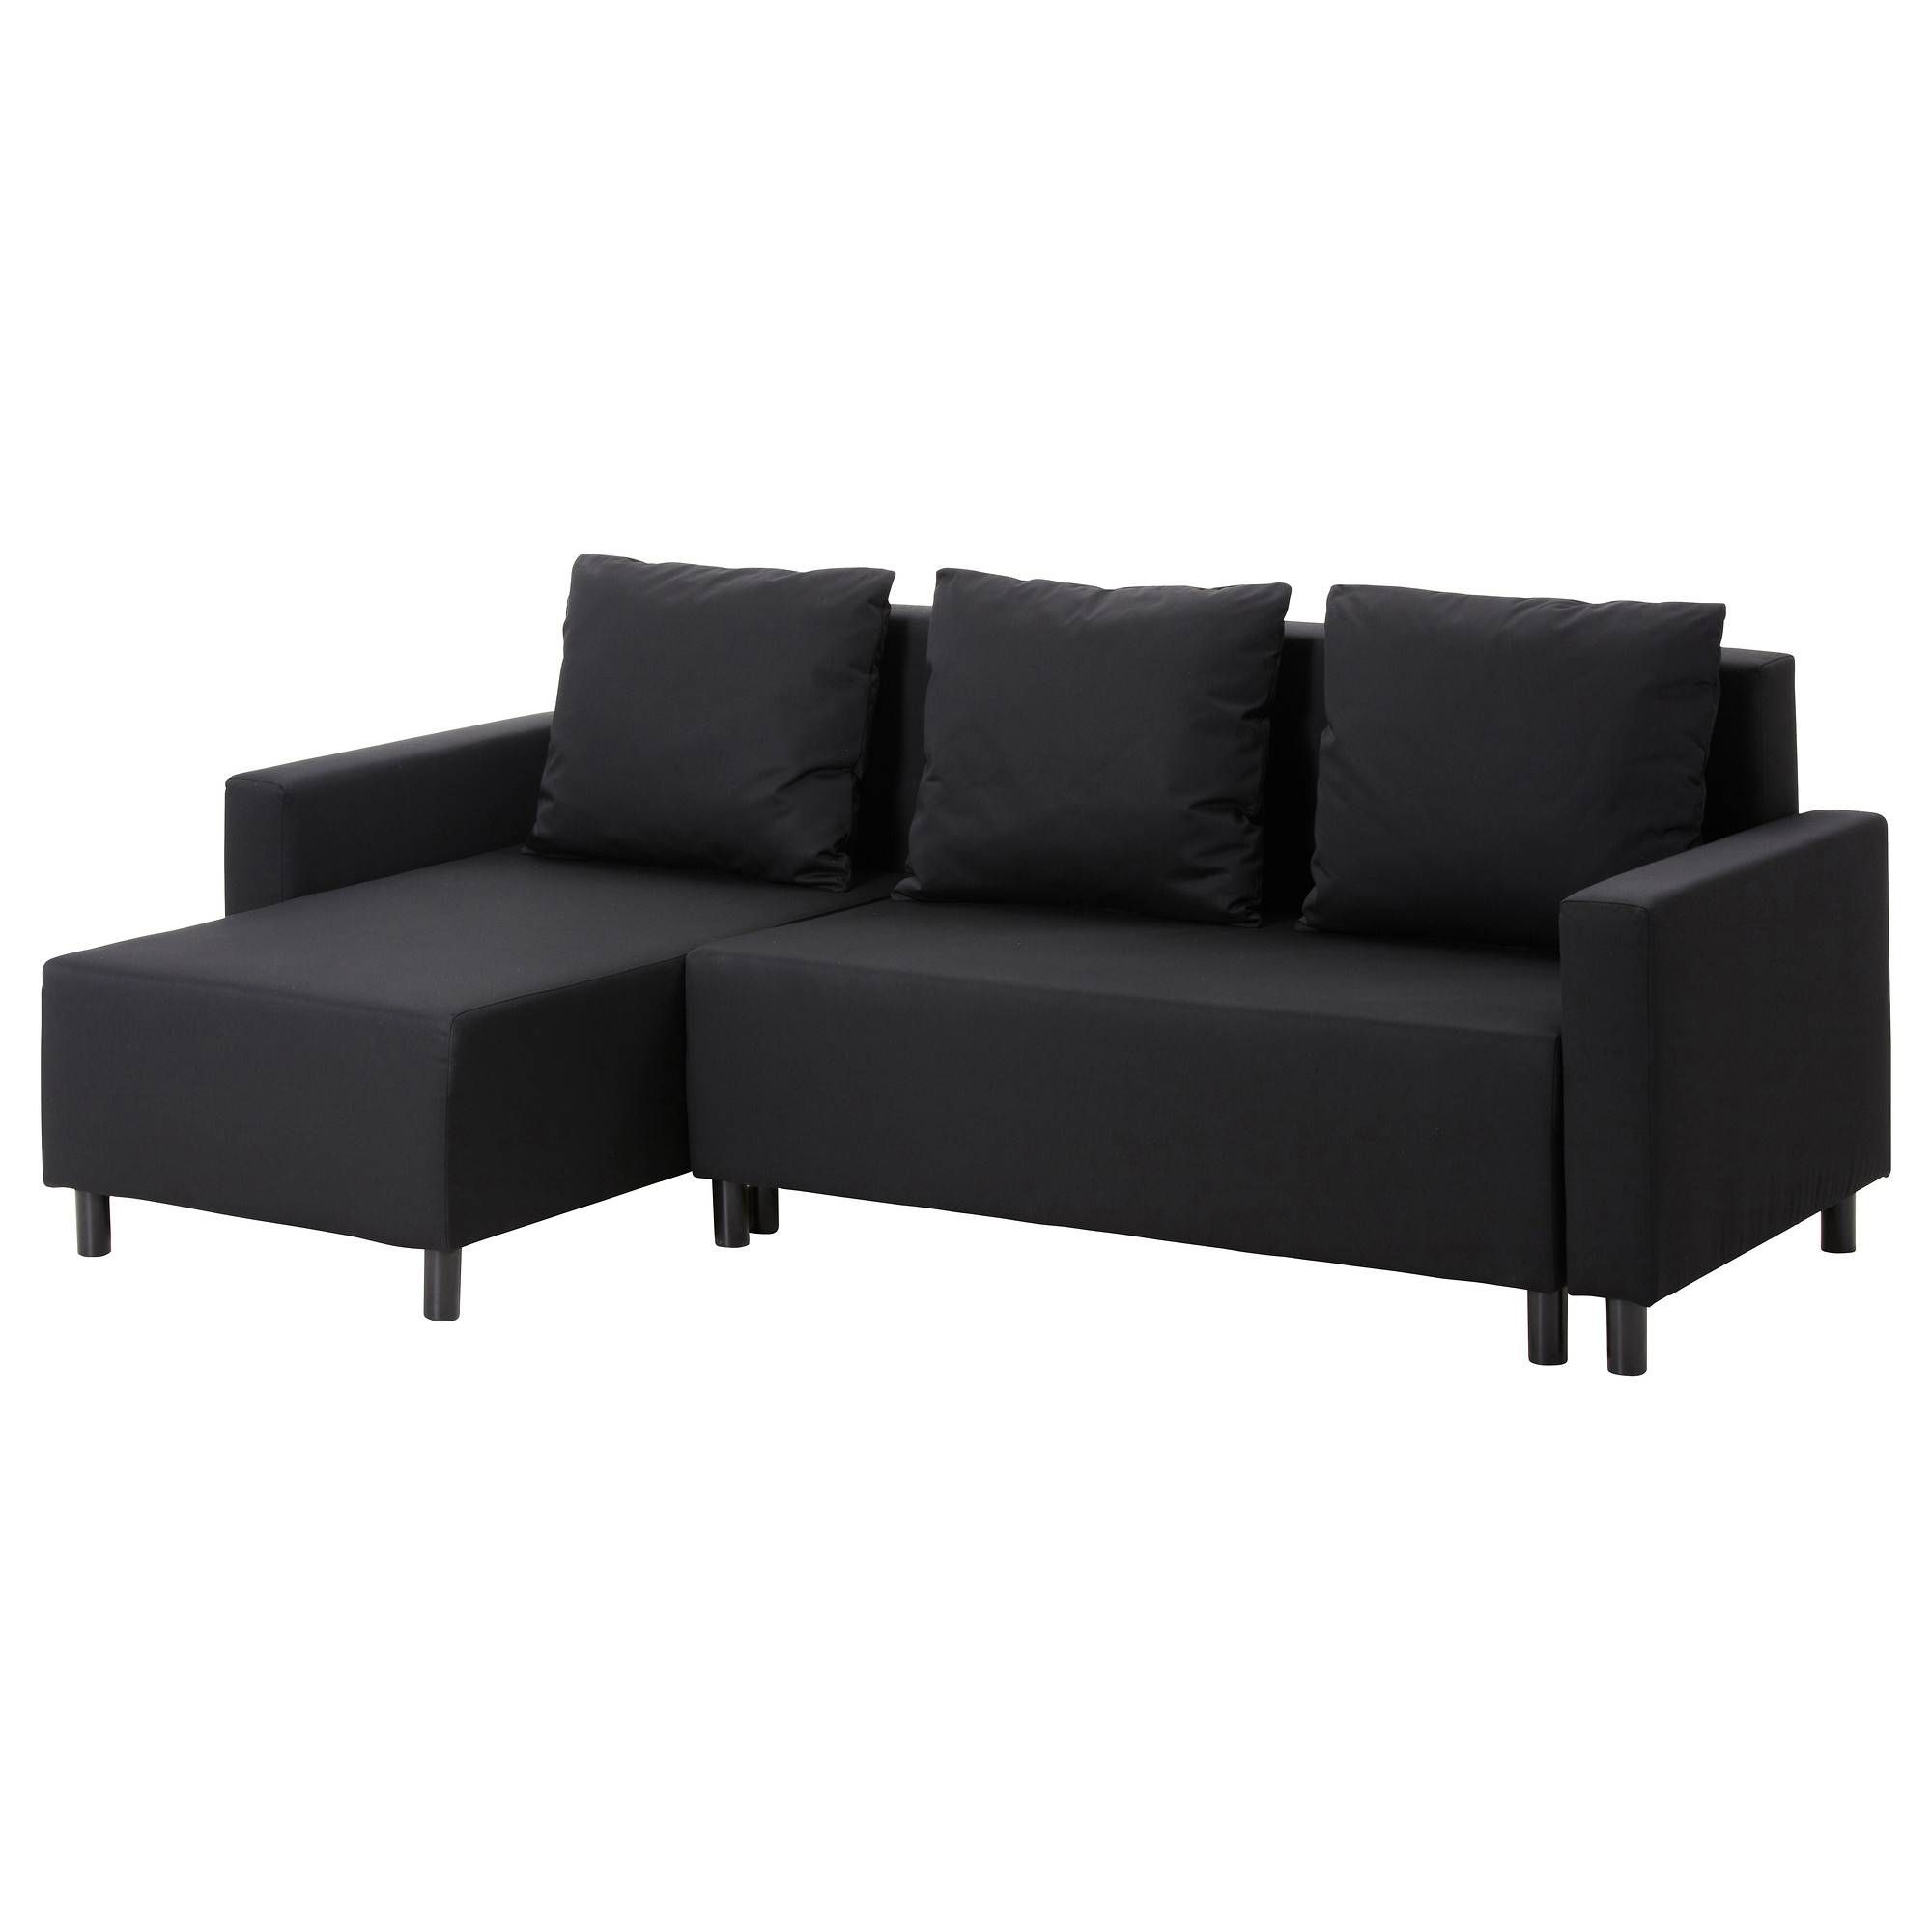 Sleeper Sofas & Chair Beds – Ikea With Manstad Sofa Bed With Storage From Ikea (View 25 of 25)